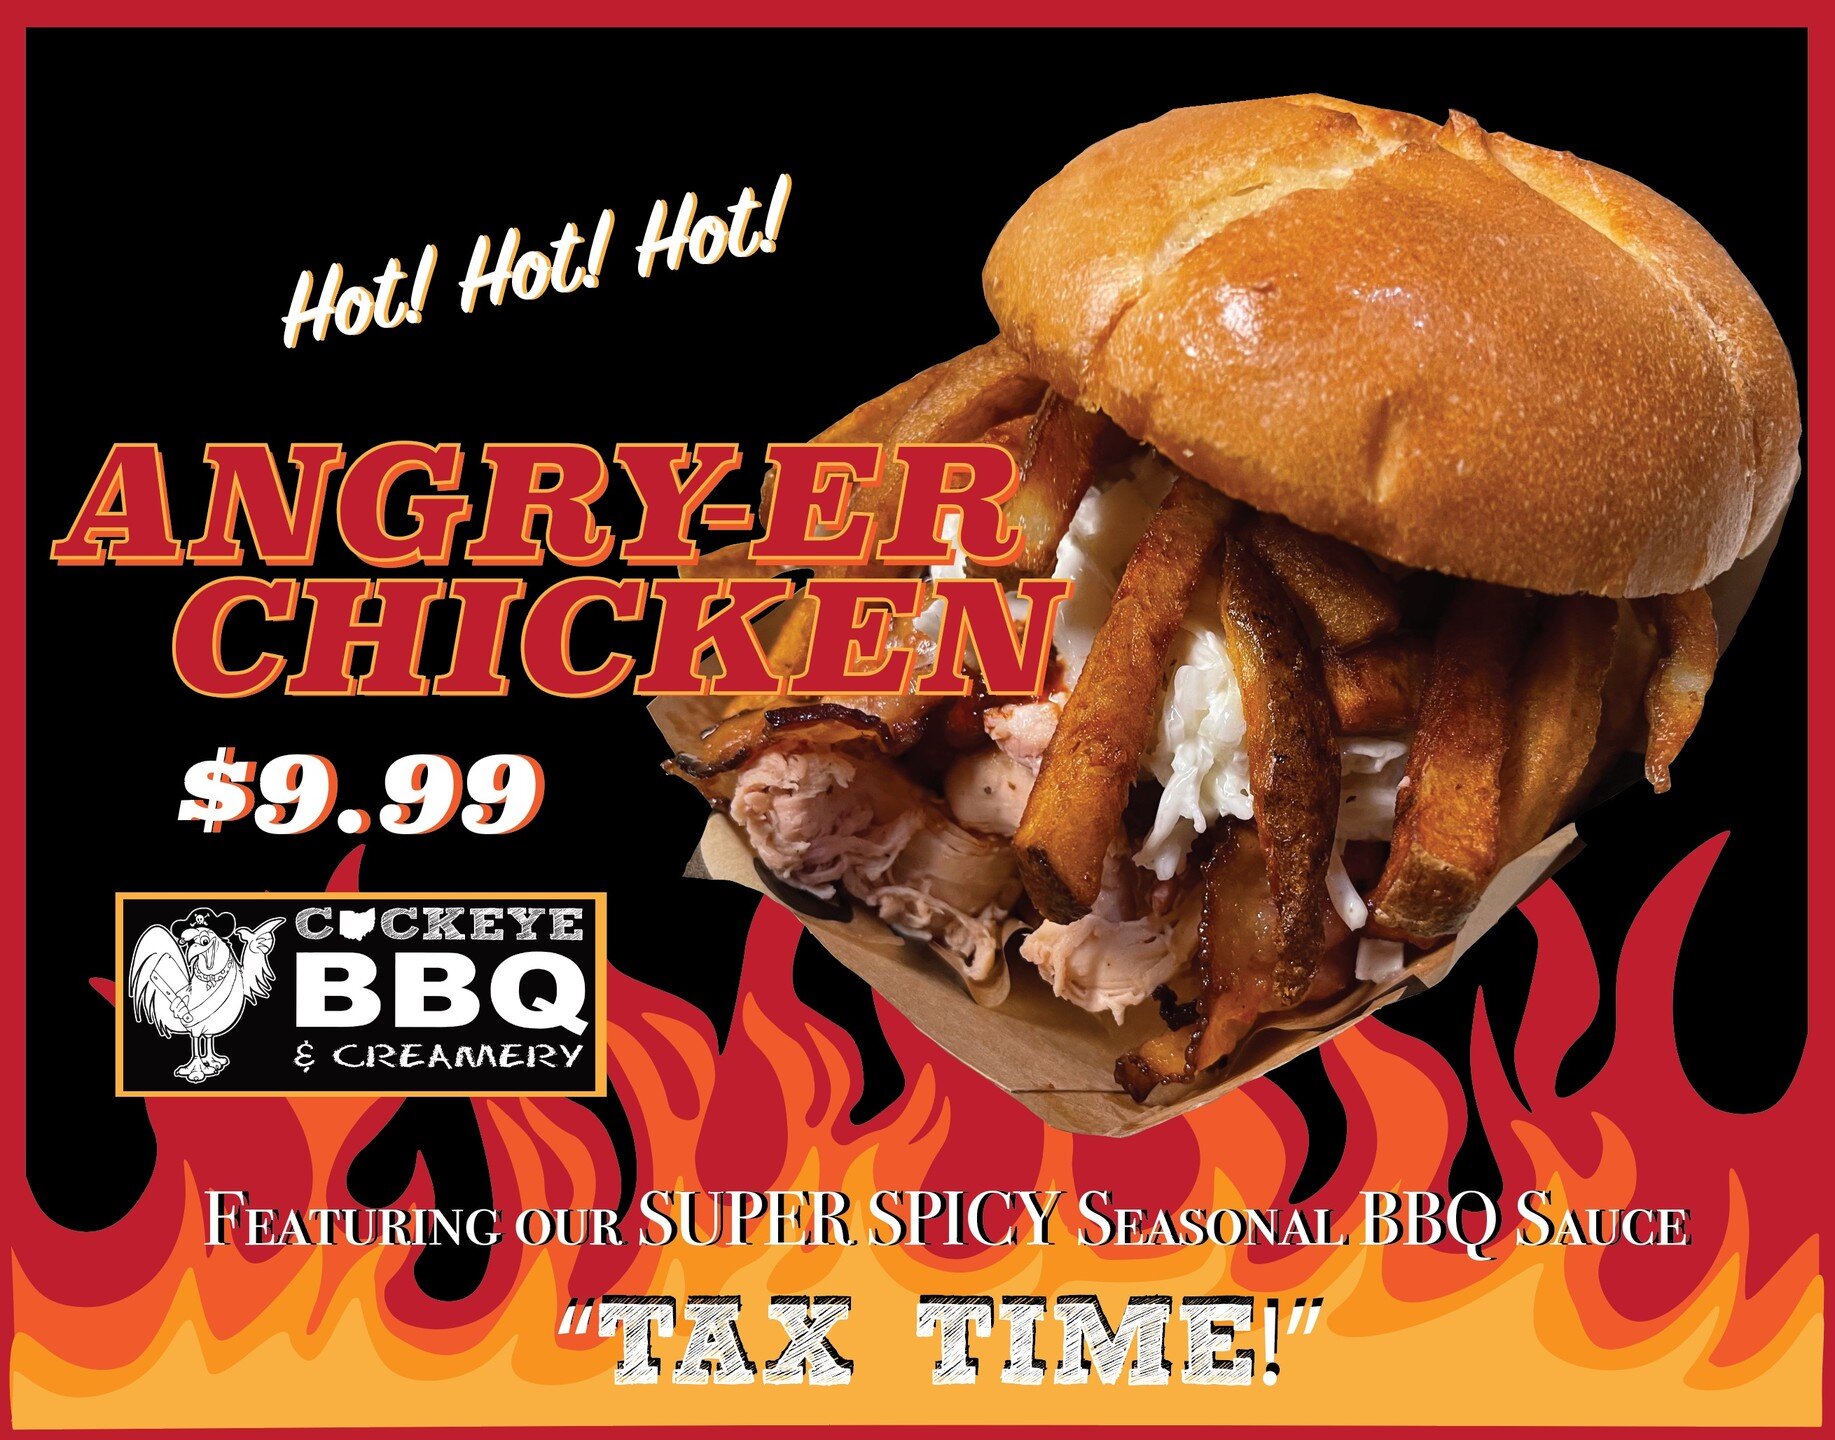 This is a blast from the past...with a TWIST!
The ANGRY-ER CHICKEN SANDWICH!
Hand-Pulled Smoked Chicken with our SUPER SPICY Seasonal BBQ Sauce &quot;TAX TIME!&quot;. Topped with Crispy Bacon, Creamy Coleslaw and Fresh-Cut French Fries.
This is one k